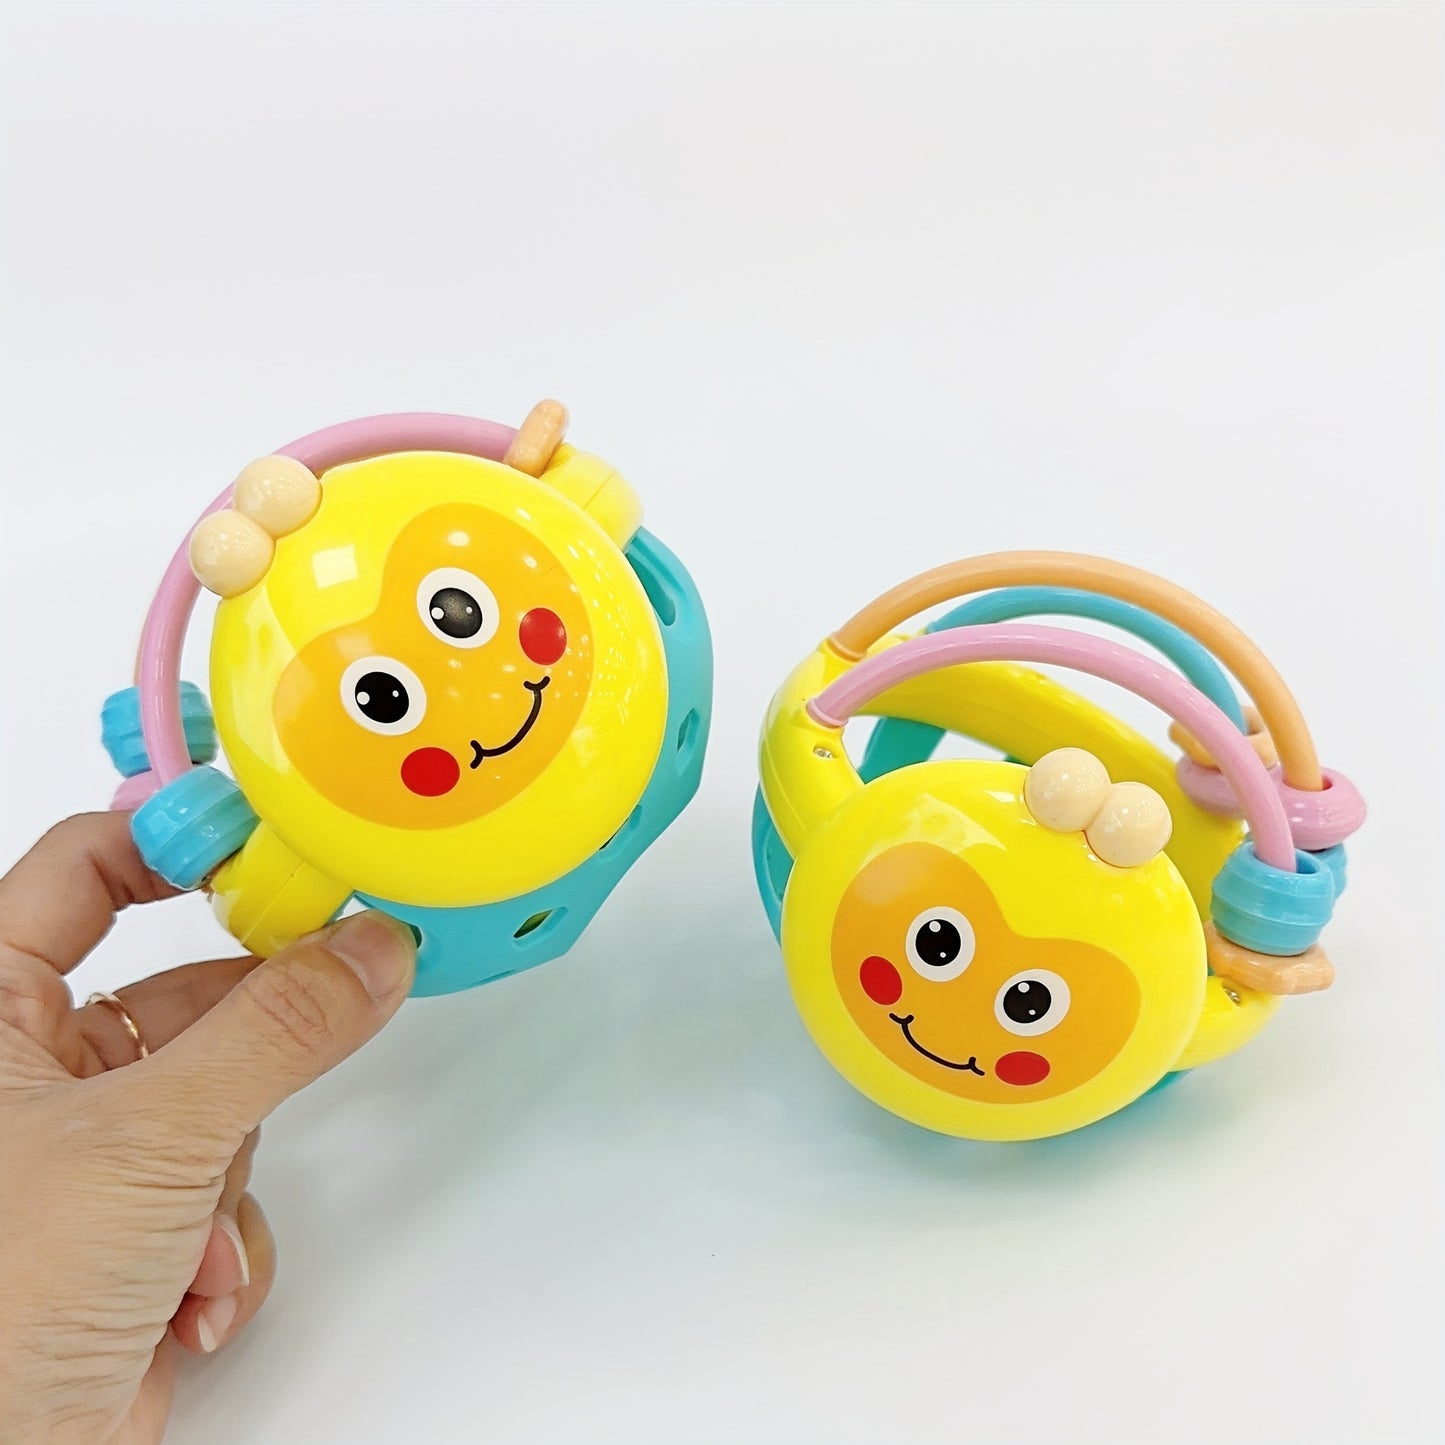 Baby Toys, Newborn Toys, Rattles, Grasping, Gnawing Toys, Hand Grasping Balls